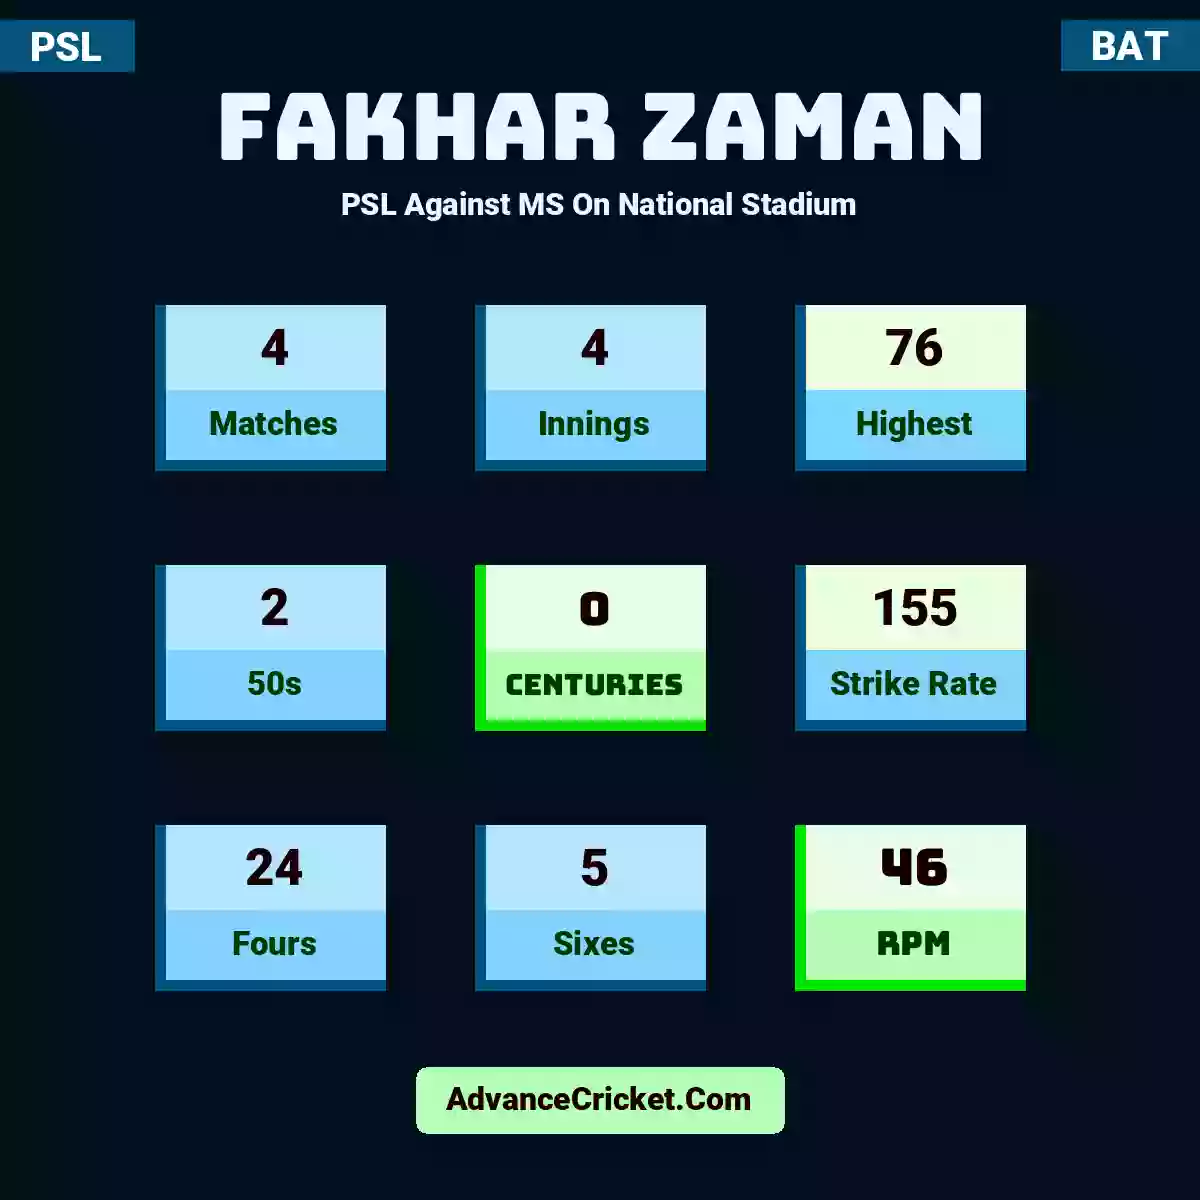 Fakhar Zaman PSL  Against MS On National Stadium, Fakhar Zaman played 4 matches, scored 76 runs as highest, 2 half-centuries, and 0 centuries, with a strike rate of 155. F.Zaman hit 24 fours and 5 sixes, with an RPM of 46.